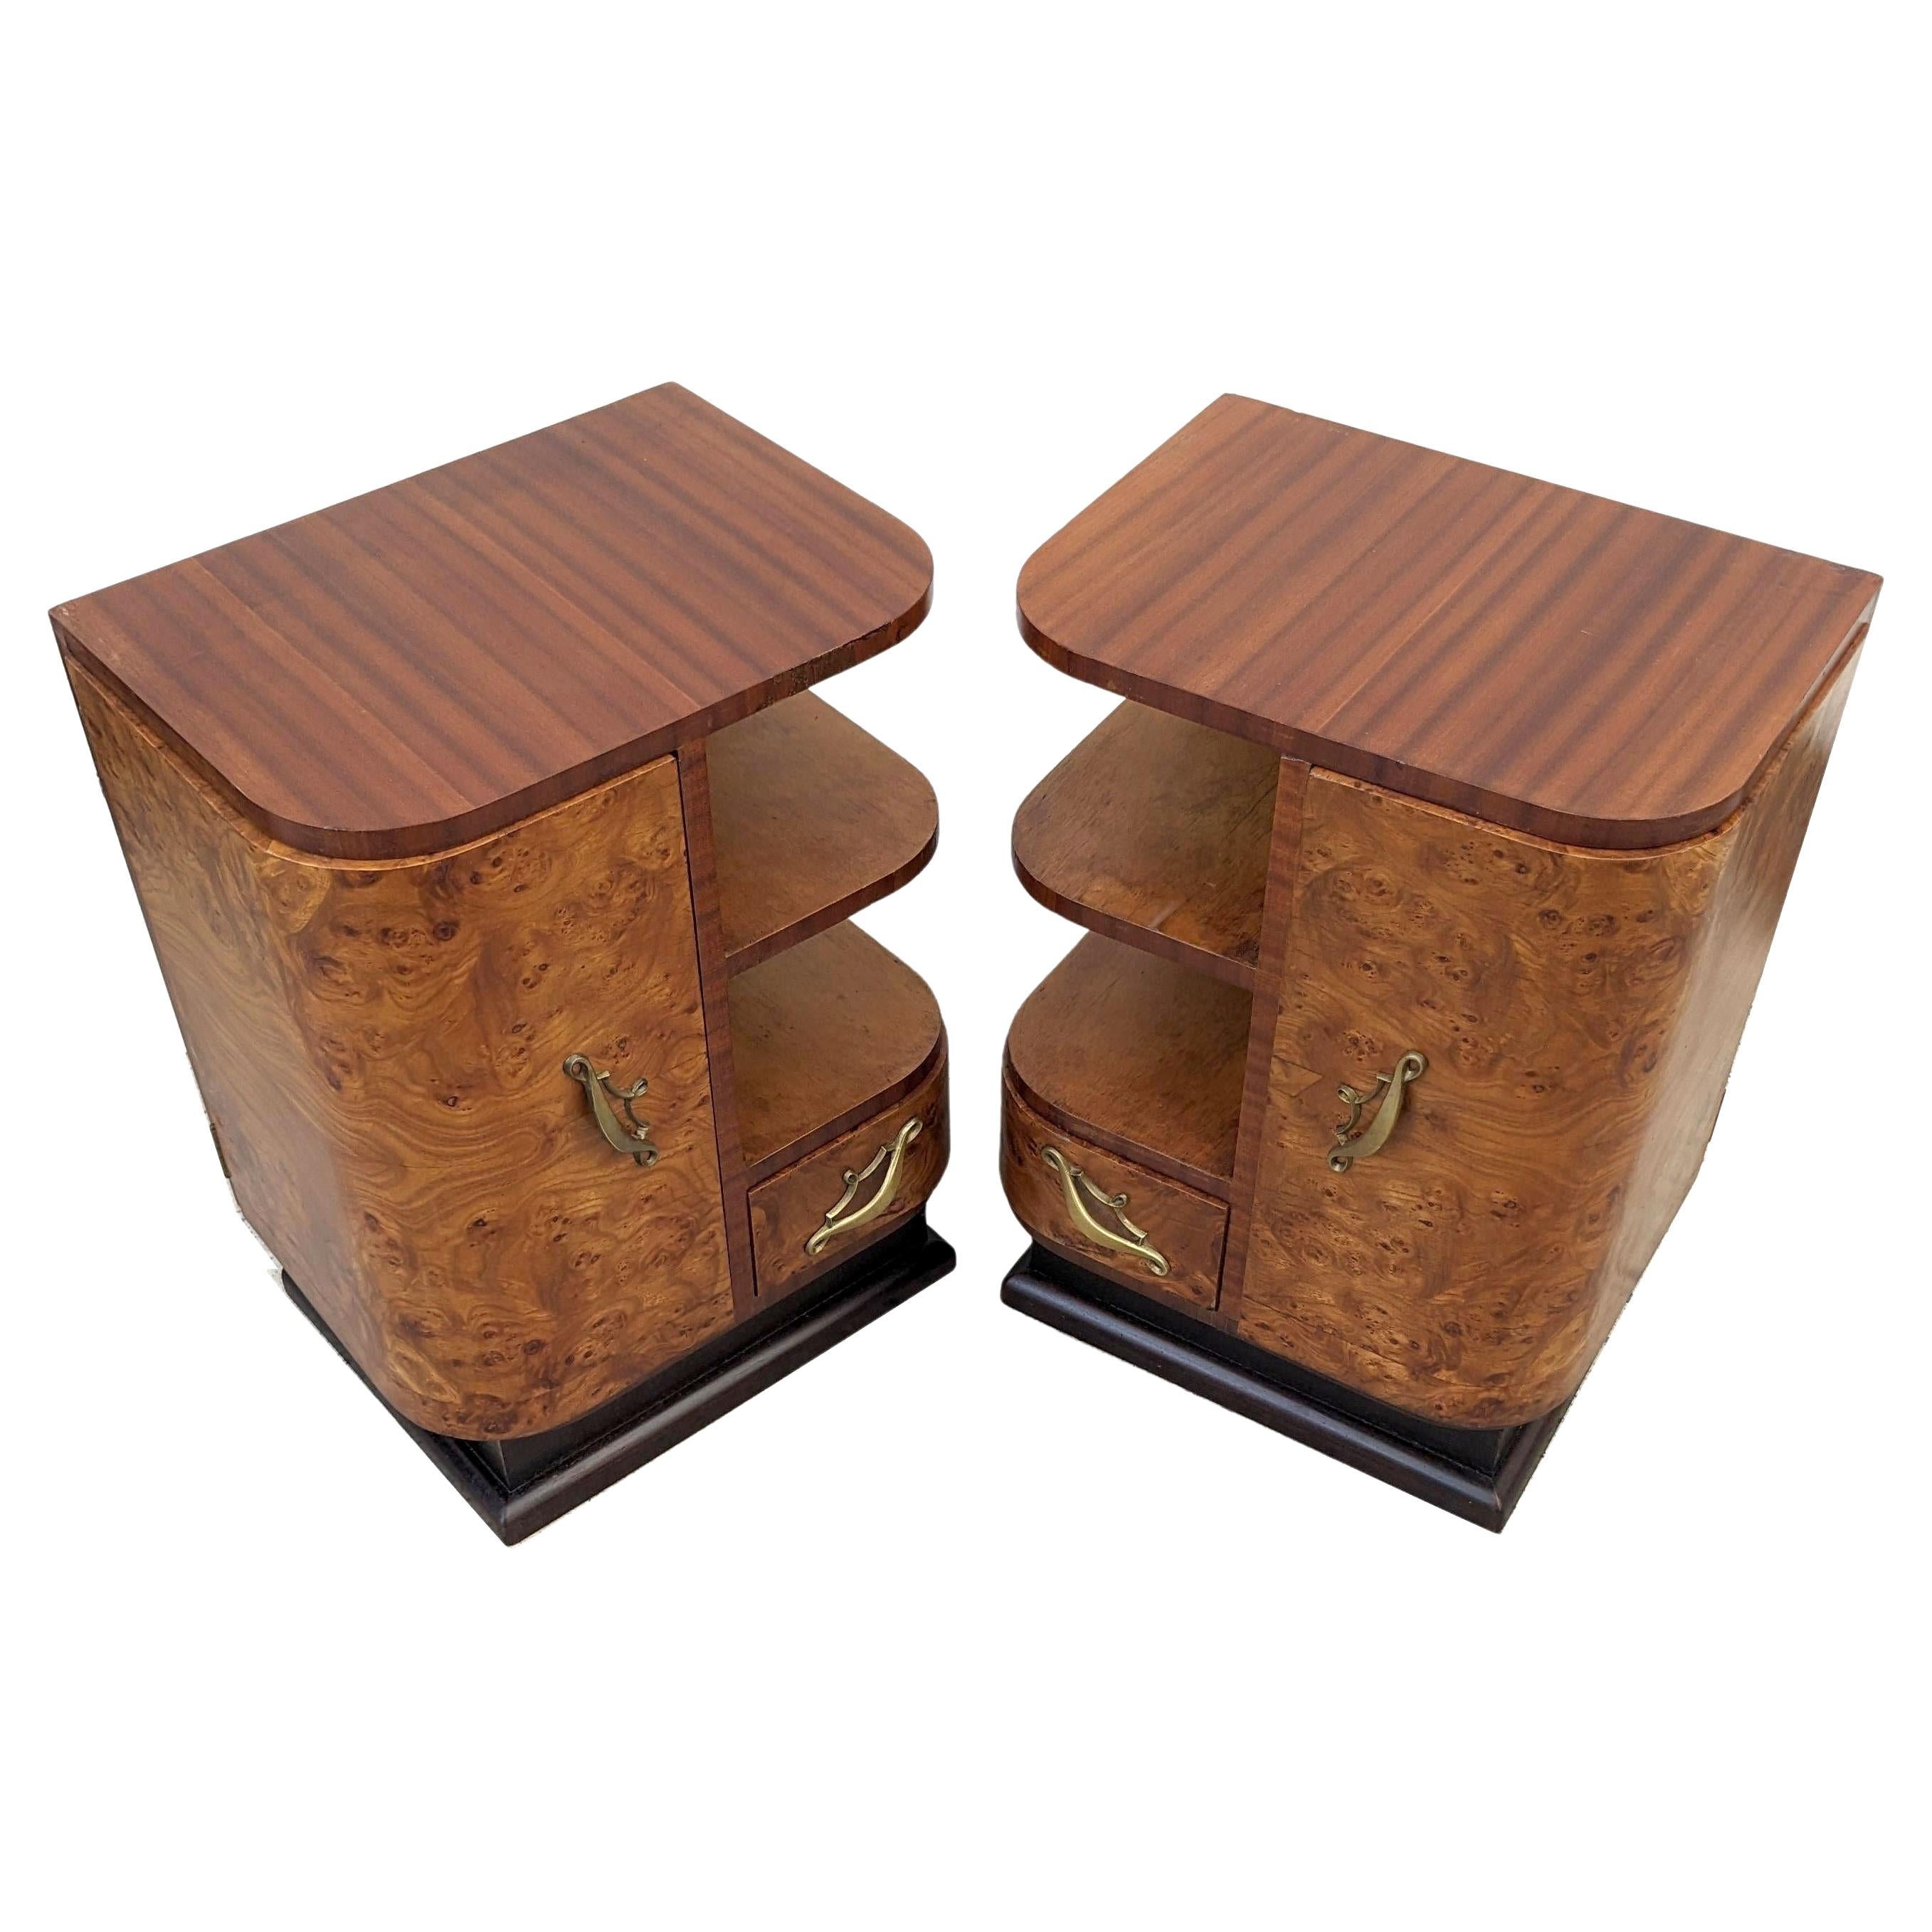 Spectacular Art Deco Pair Matching of Italian Bedside Table Nightstands, c1930 For Sale 1